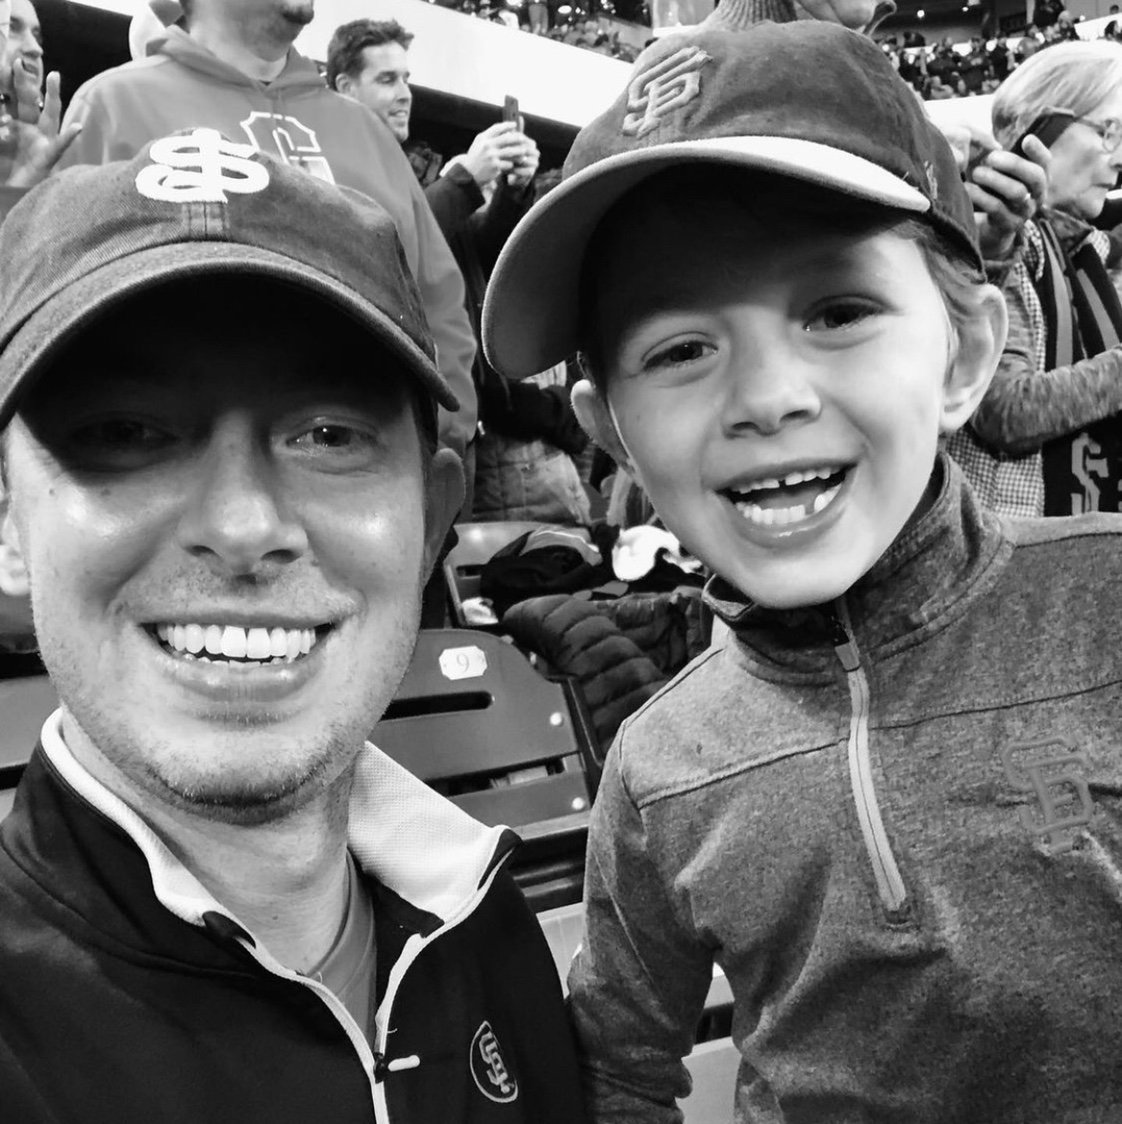 Full time Papa, part time interior design assistant for my lovely wife, die hard sports fanatic…Go Blazers, Ducks and baseball! Thoughts are my own.